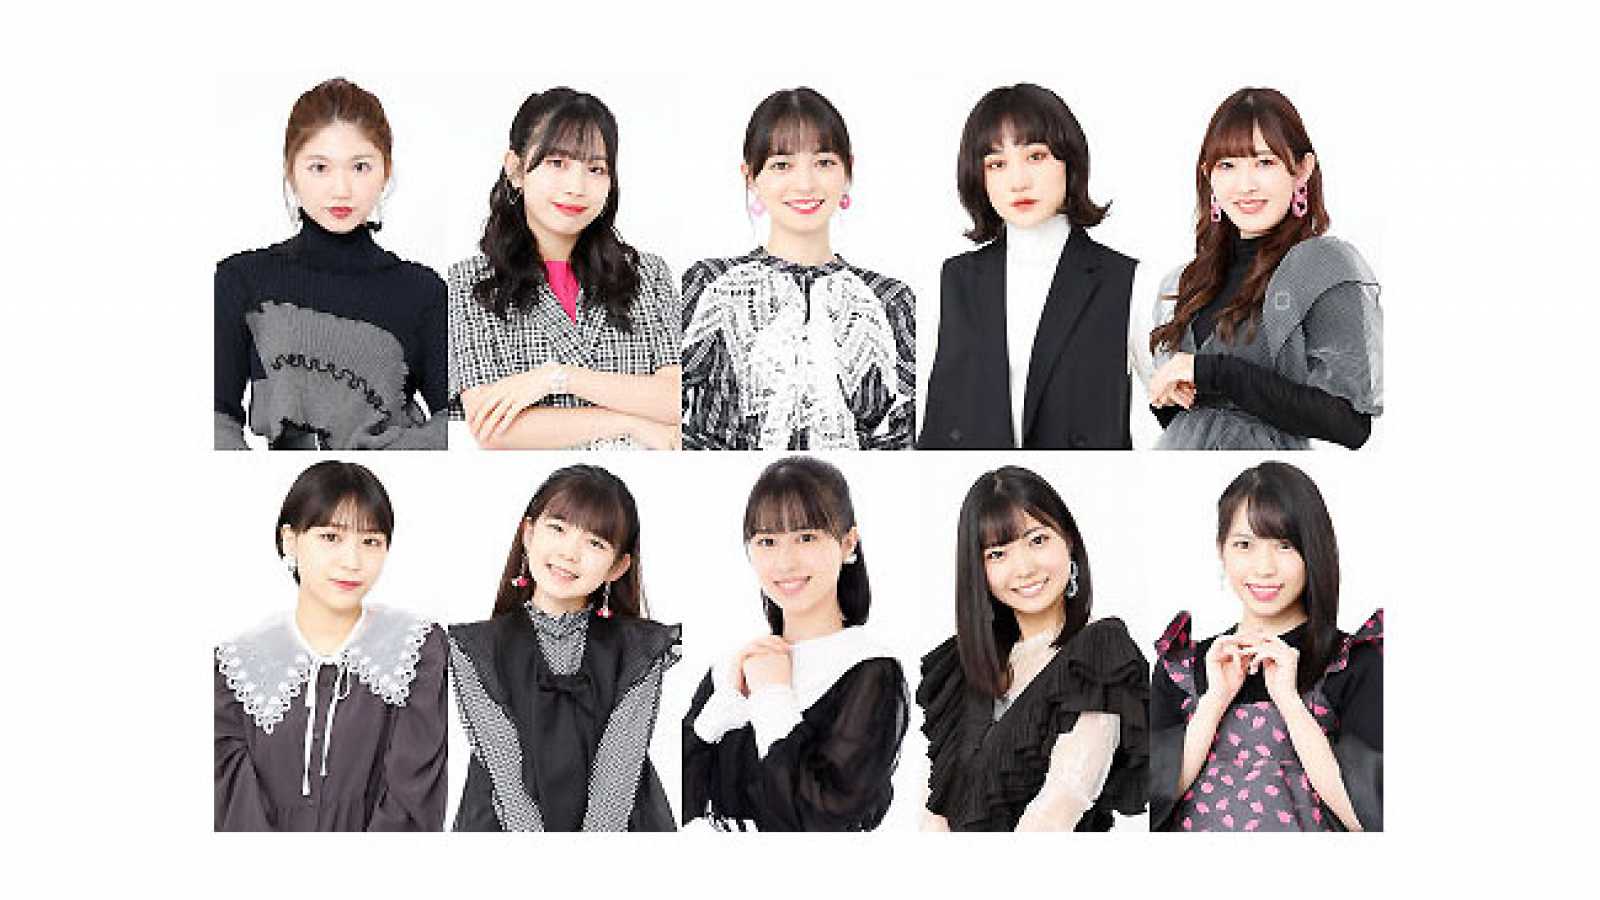 Hirayama Yuki neues Mitglied bei ANGERME © DC FACTORY all rights reserved.